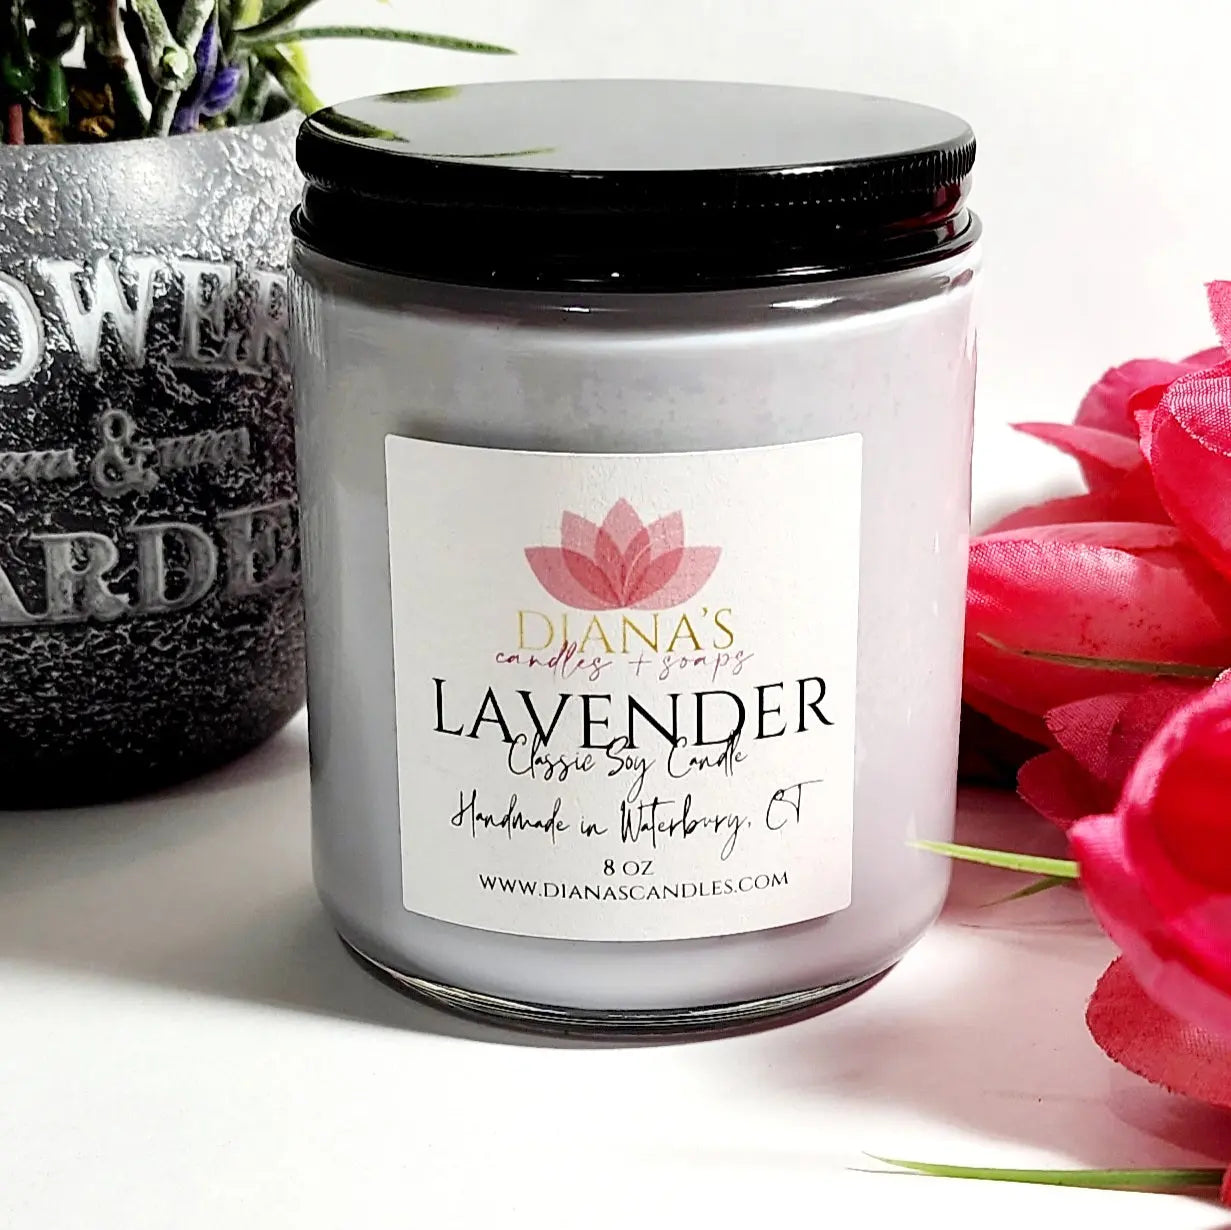 Lavender Candle - Diana's Candles and Soaps 